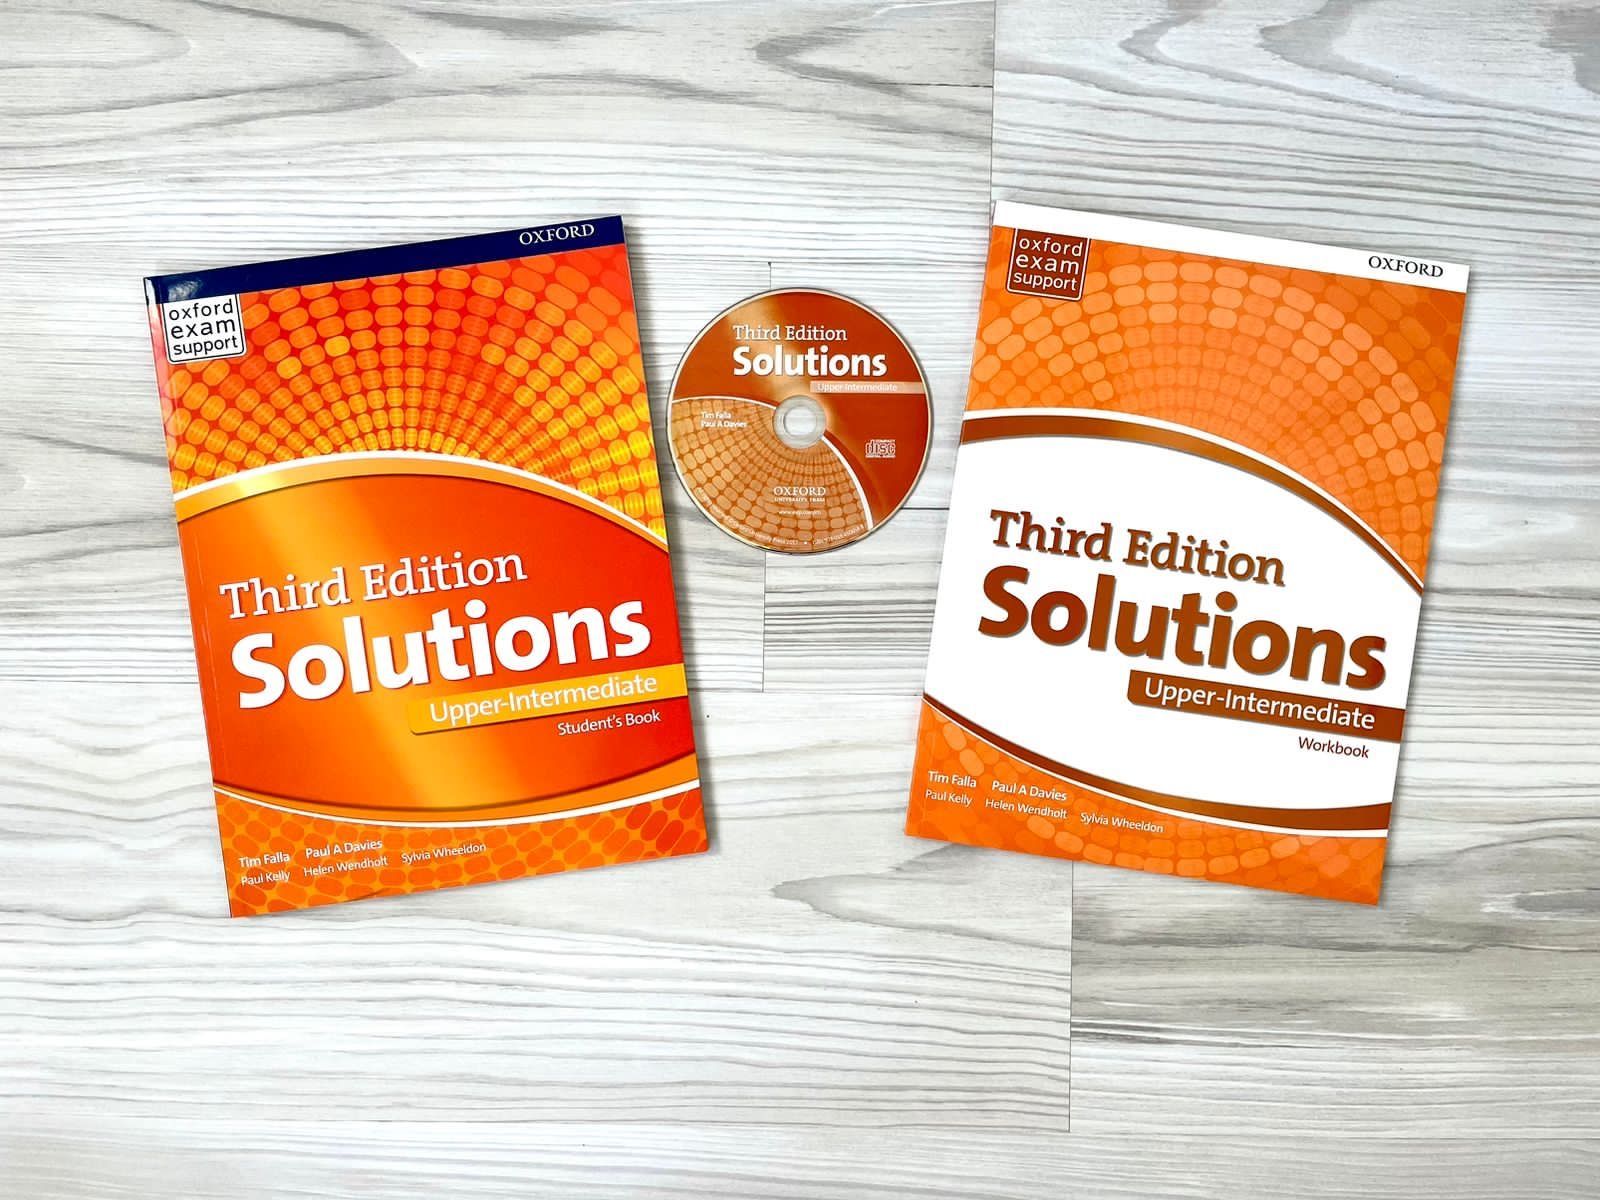 Solutions upper intermediate student. Solutions Upper Intermediate student's book. Solutions books. Oxford University Press third Edition solution.